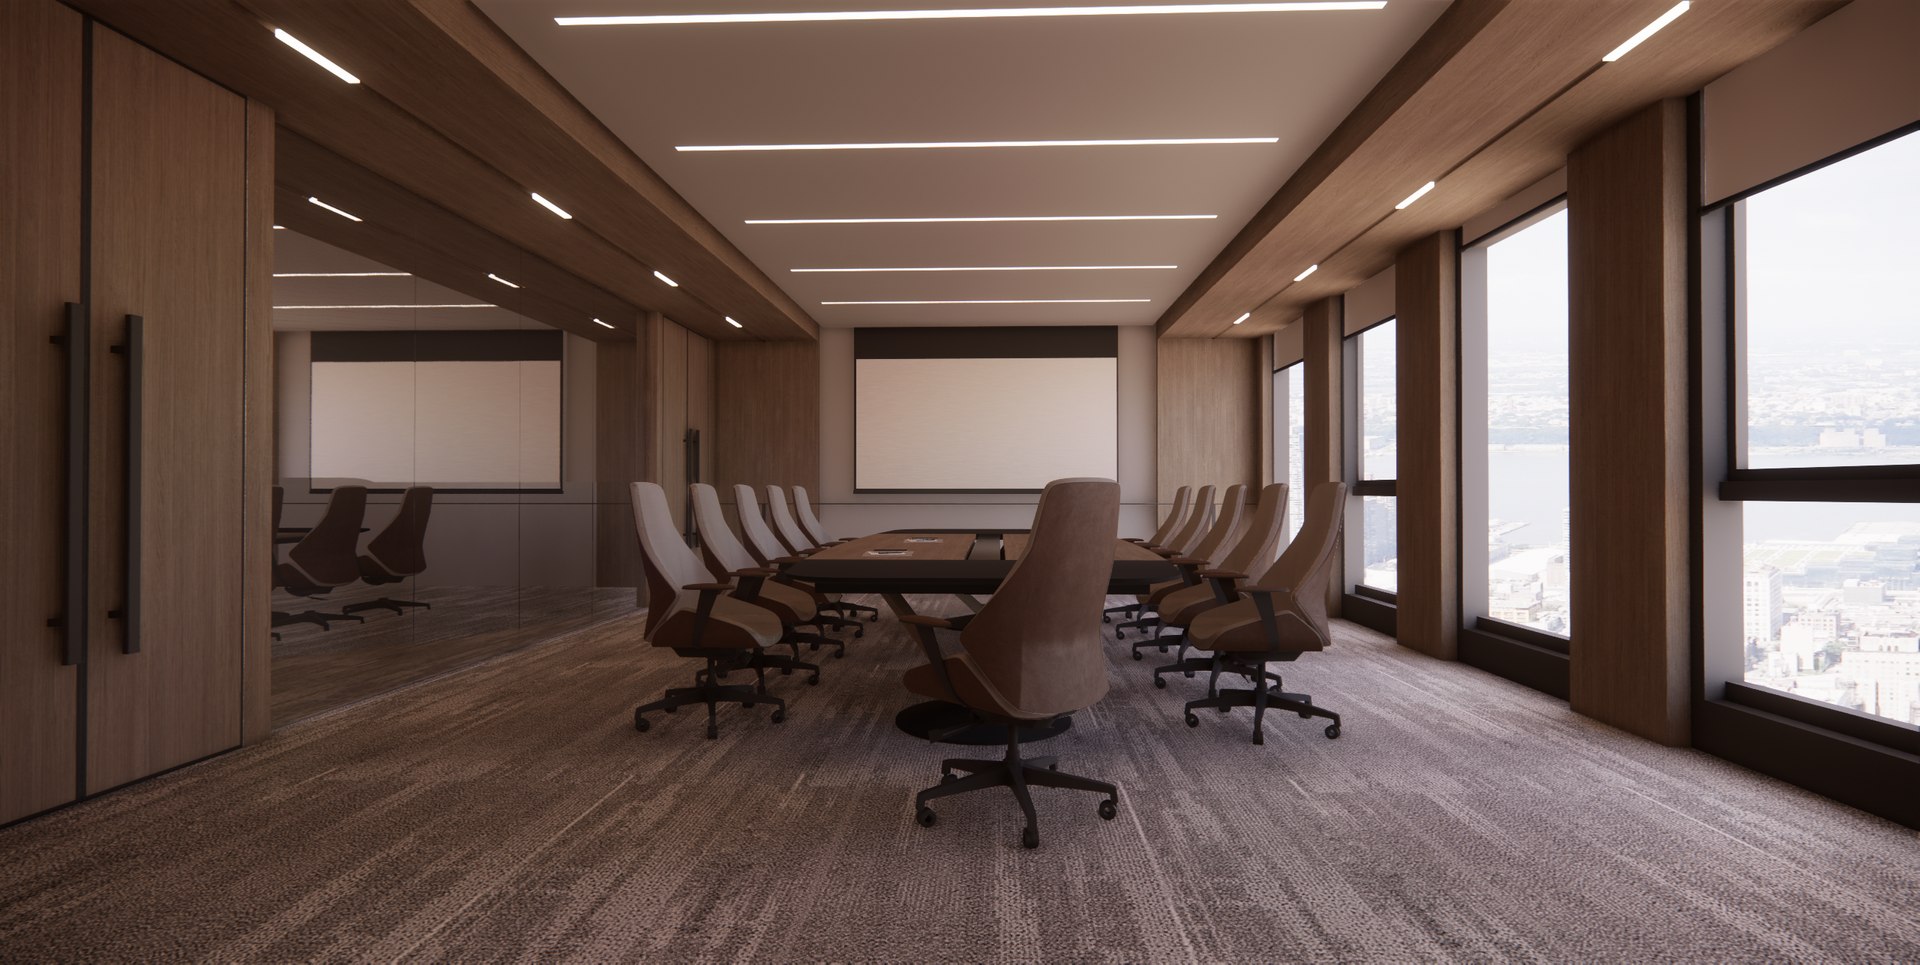 Conference Room-A3 model - TurboSquid 2040160